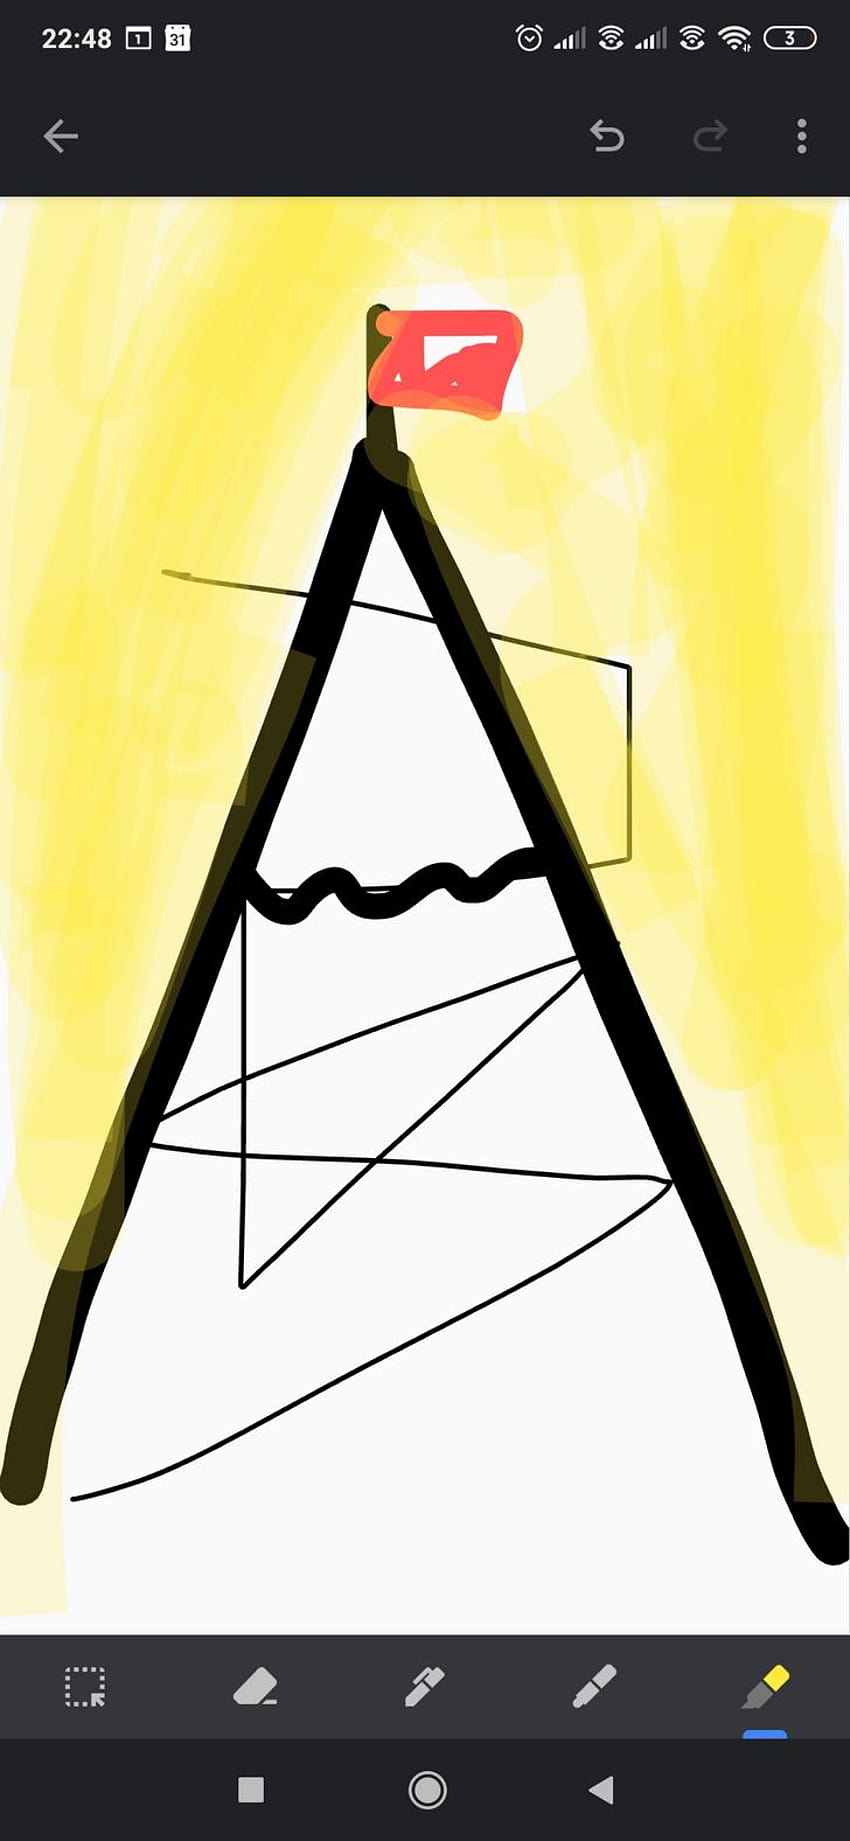 Please help me find a . Drawing of a mountain with a zigzag path and a man climbing up it. Looked something like that with orange and red tones, draw climber HD phone wallpaper